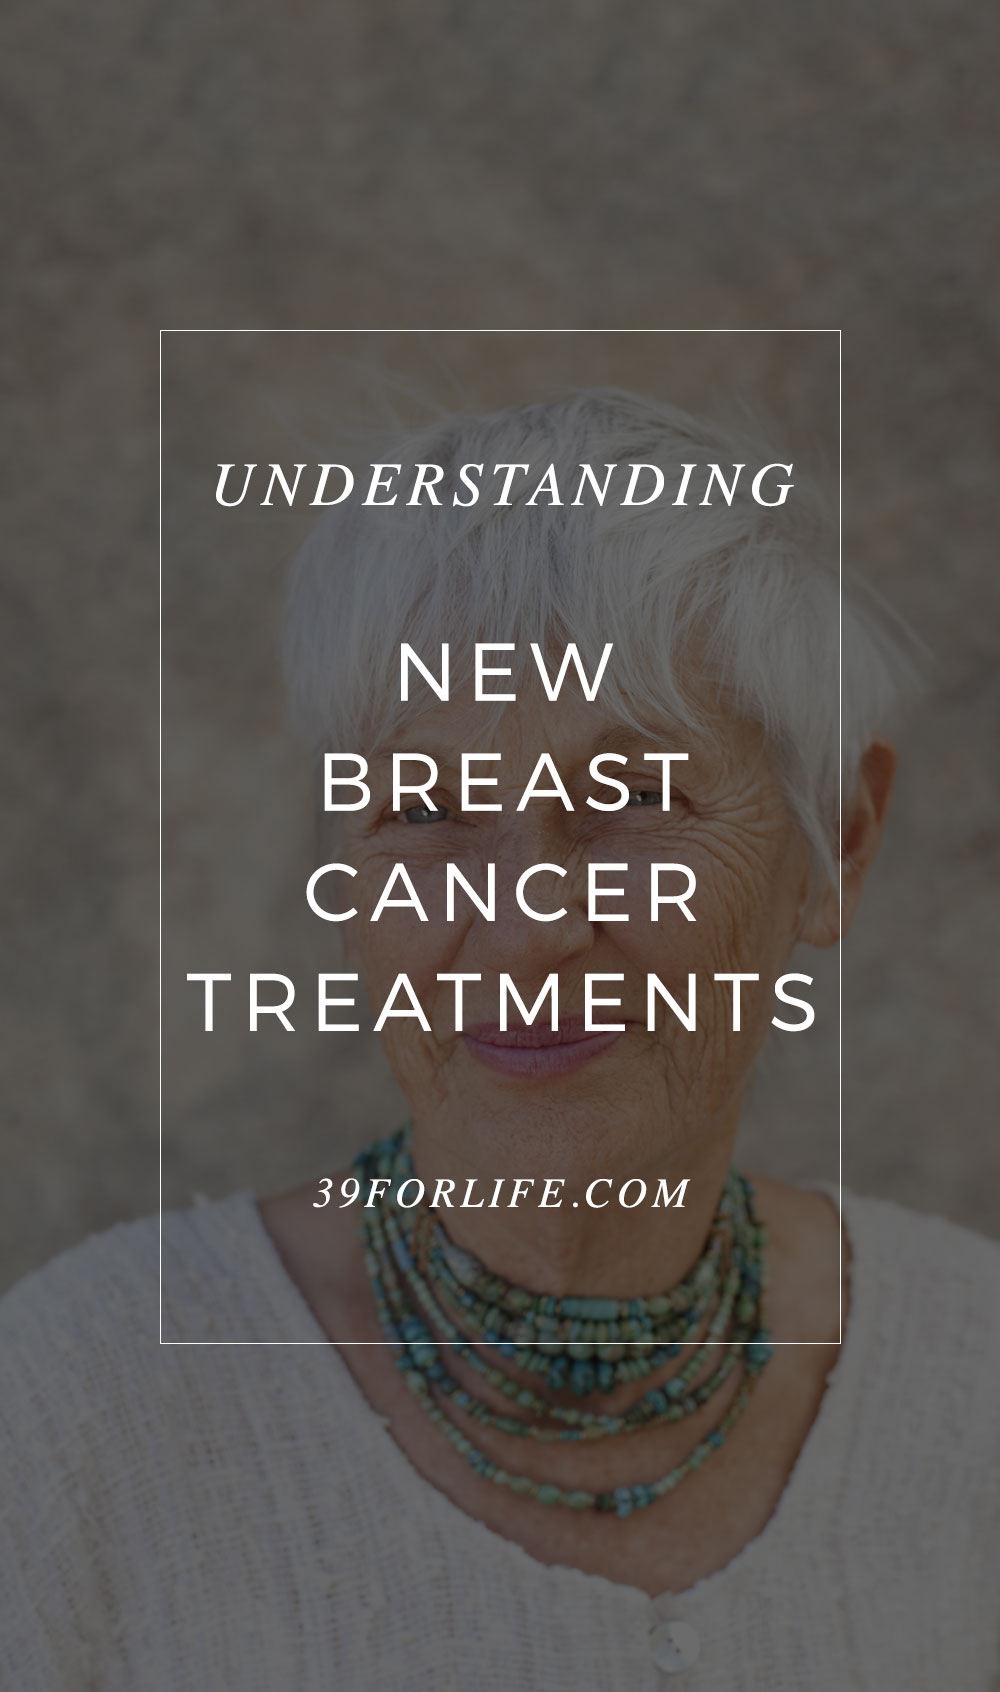 A radiation oncologist explains the emerging technologies to treat breast cancer. Every woman should know this.